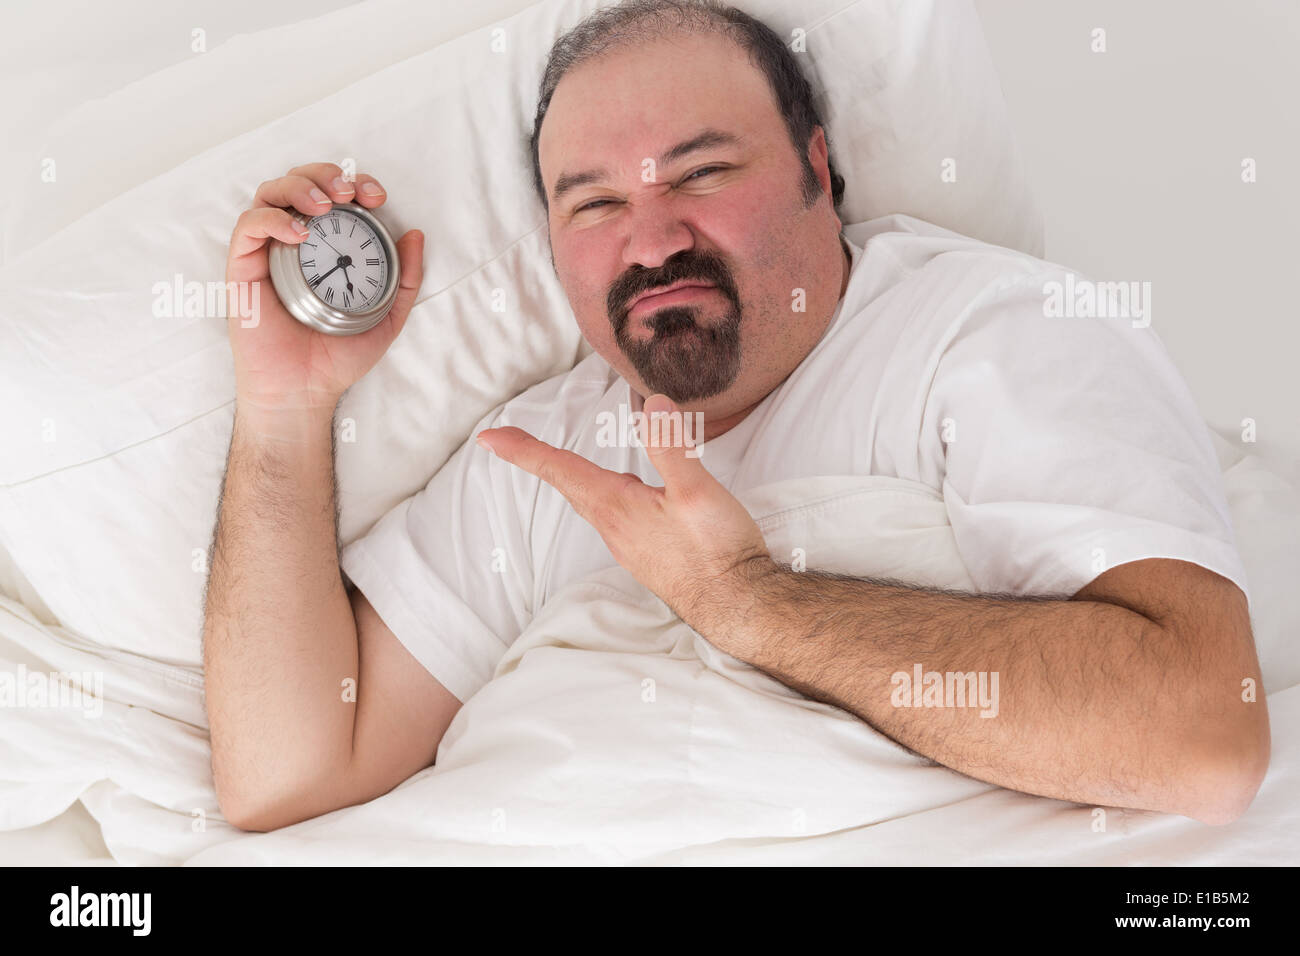 Middle-aged bearded man kept awake by noisy neighbors lying in bed grimacing and pointing to the time on his alarm clock Stock Photo